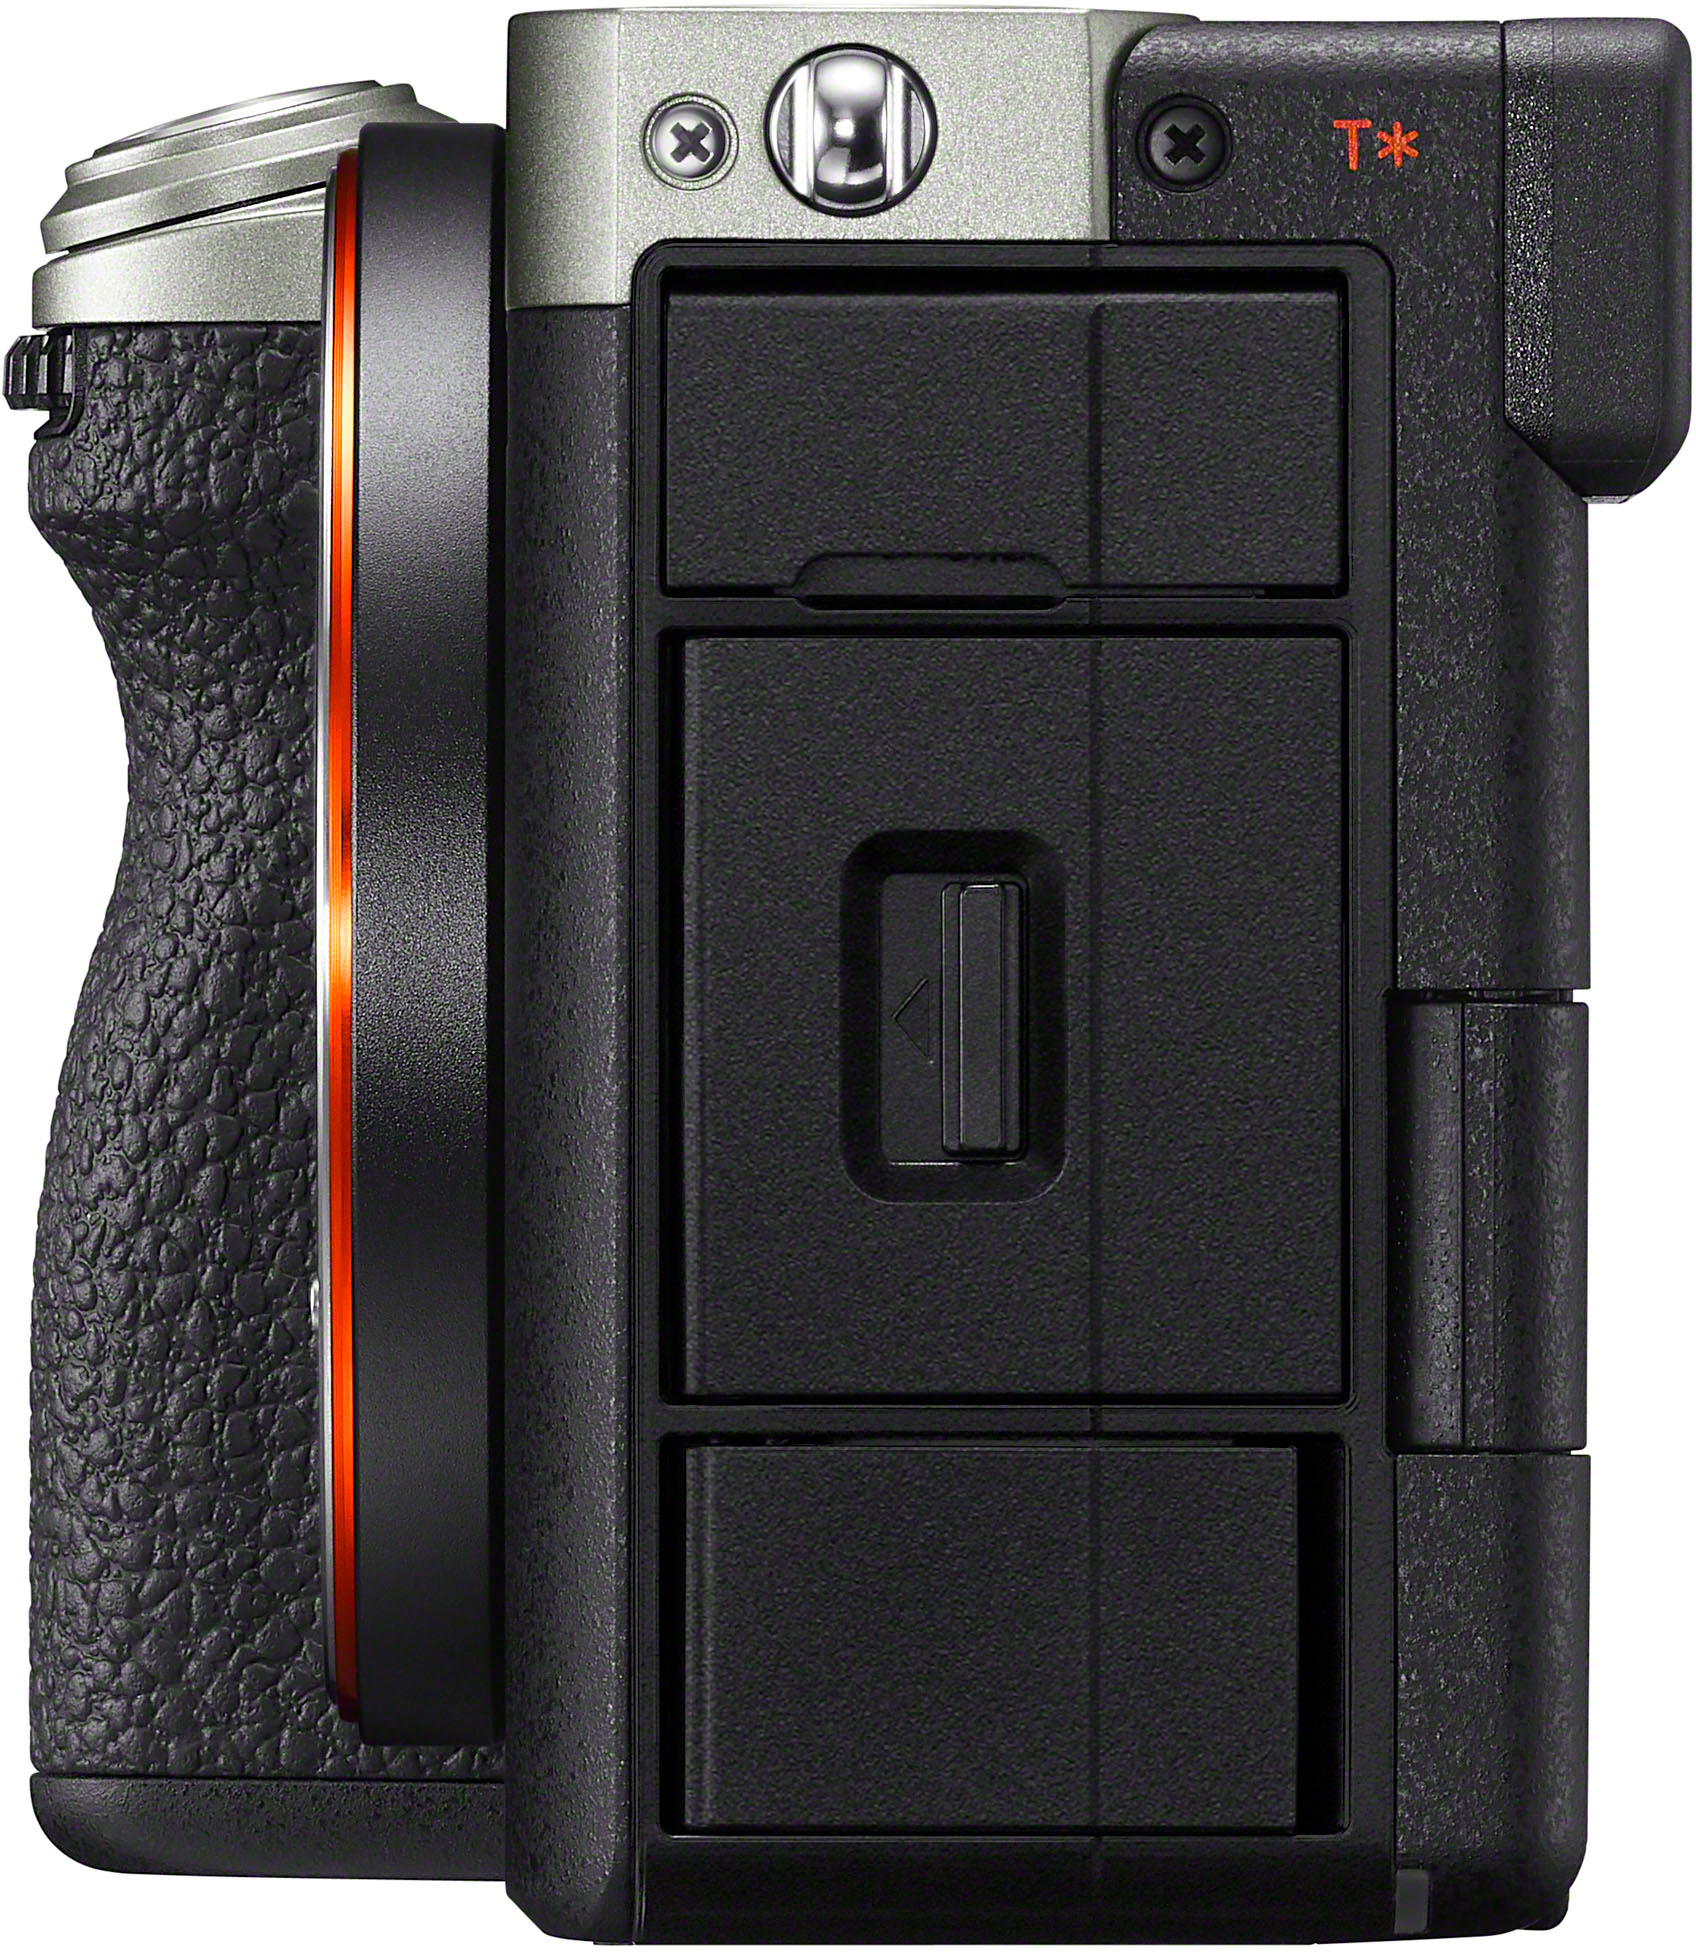 II Interchangeable 7C Buy Sony - Silver Best Camera ILCE7CM2S Full frame (Body Alpha Only) Mirrorless Lens